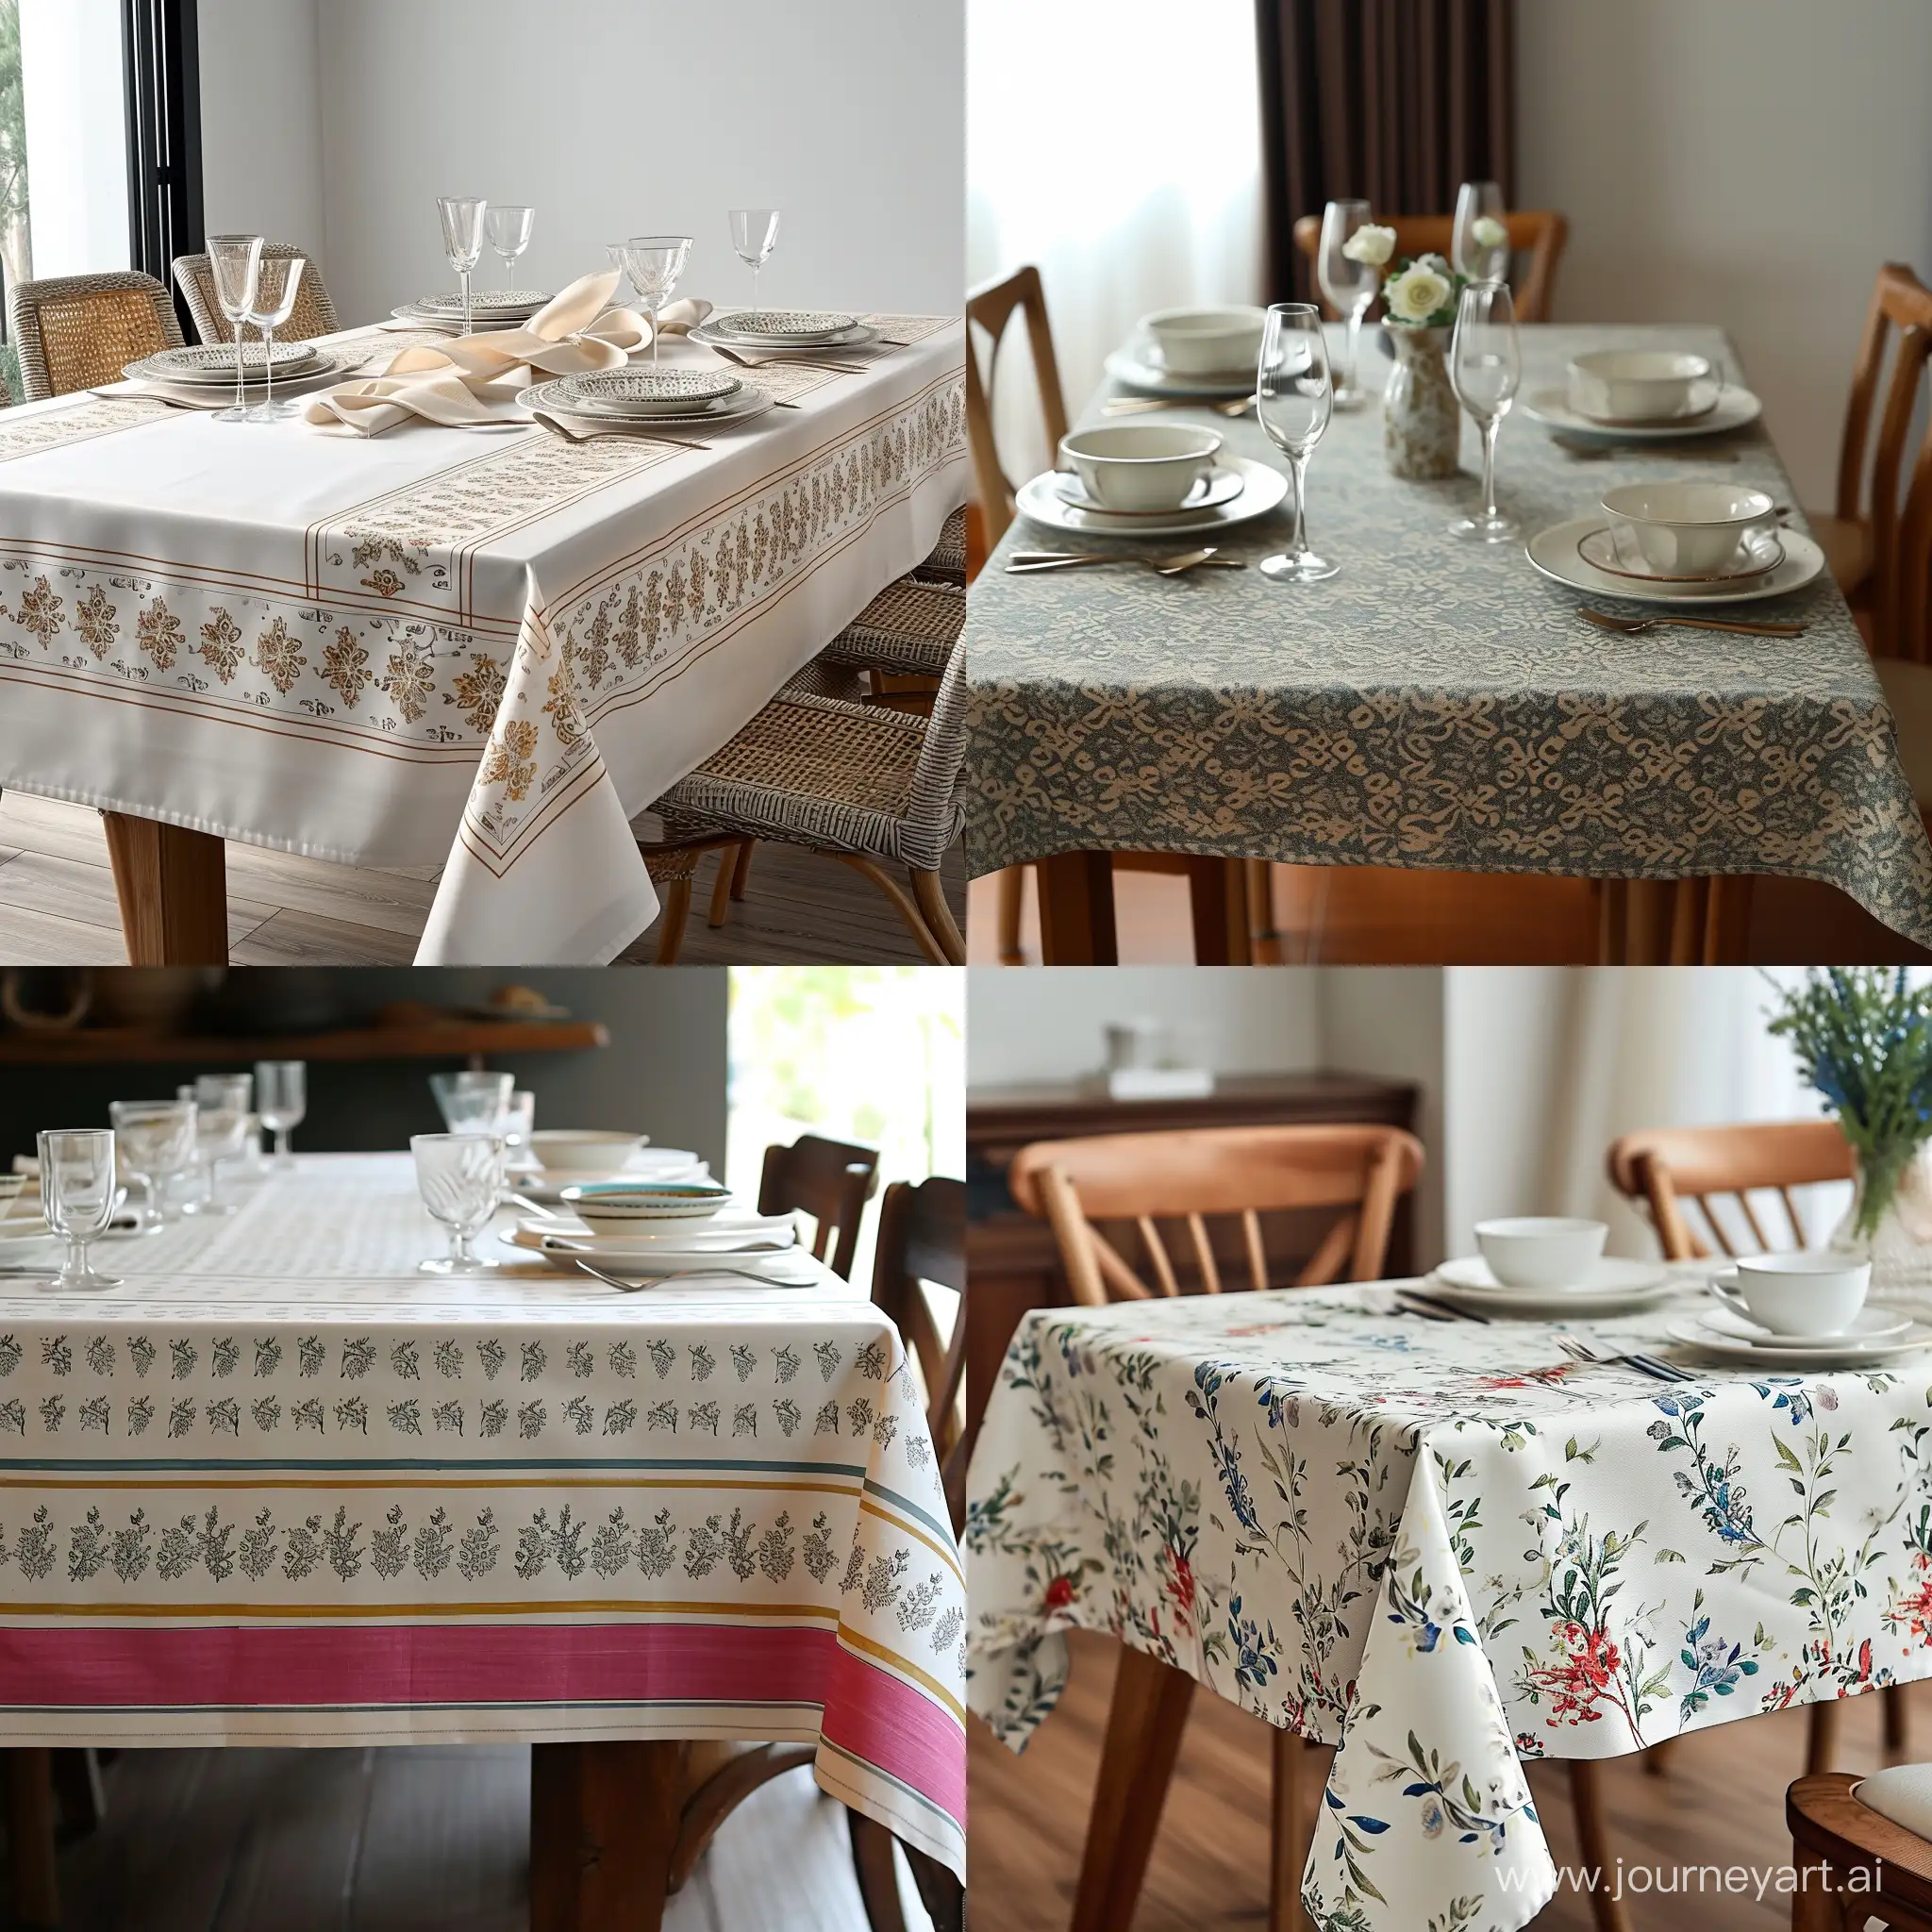 Elegant-Tablecloth-with-Intricate-Patterns-HighResolution-Image